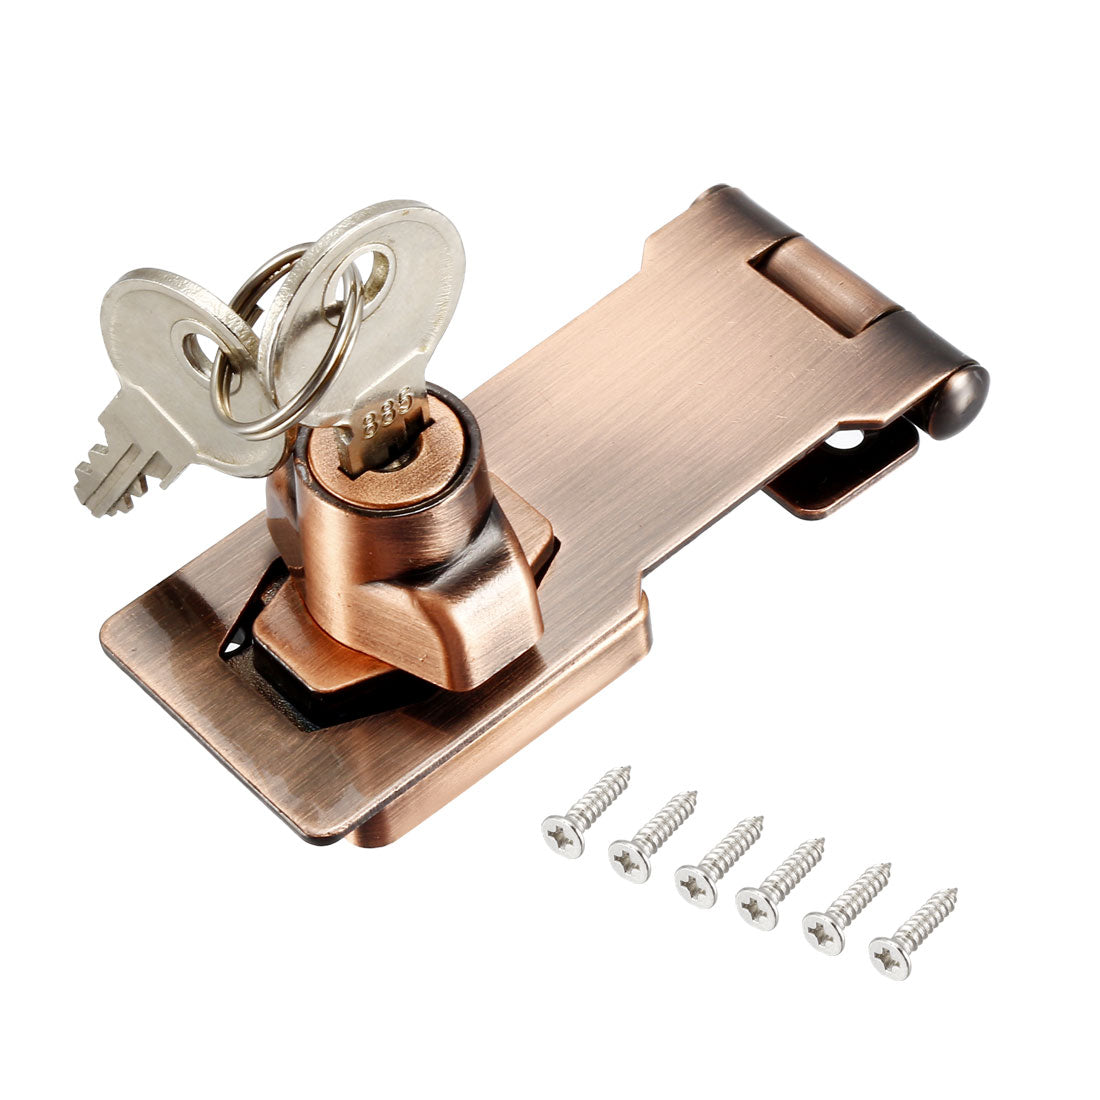 uxcell Uxcell Keyed Hasp Lock 94mm Twist Knob Keyed Locking Hasp for Door Cabinet Keyed Different Red Copper Tone